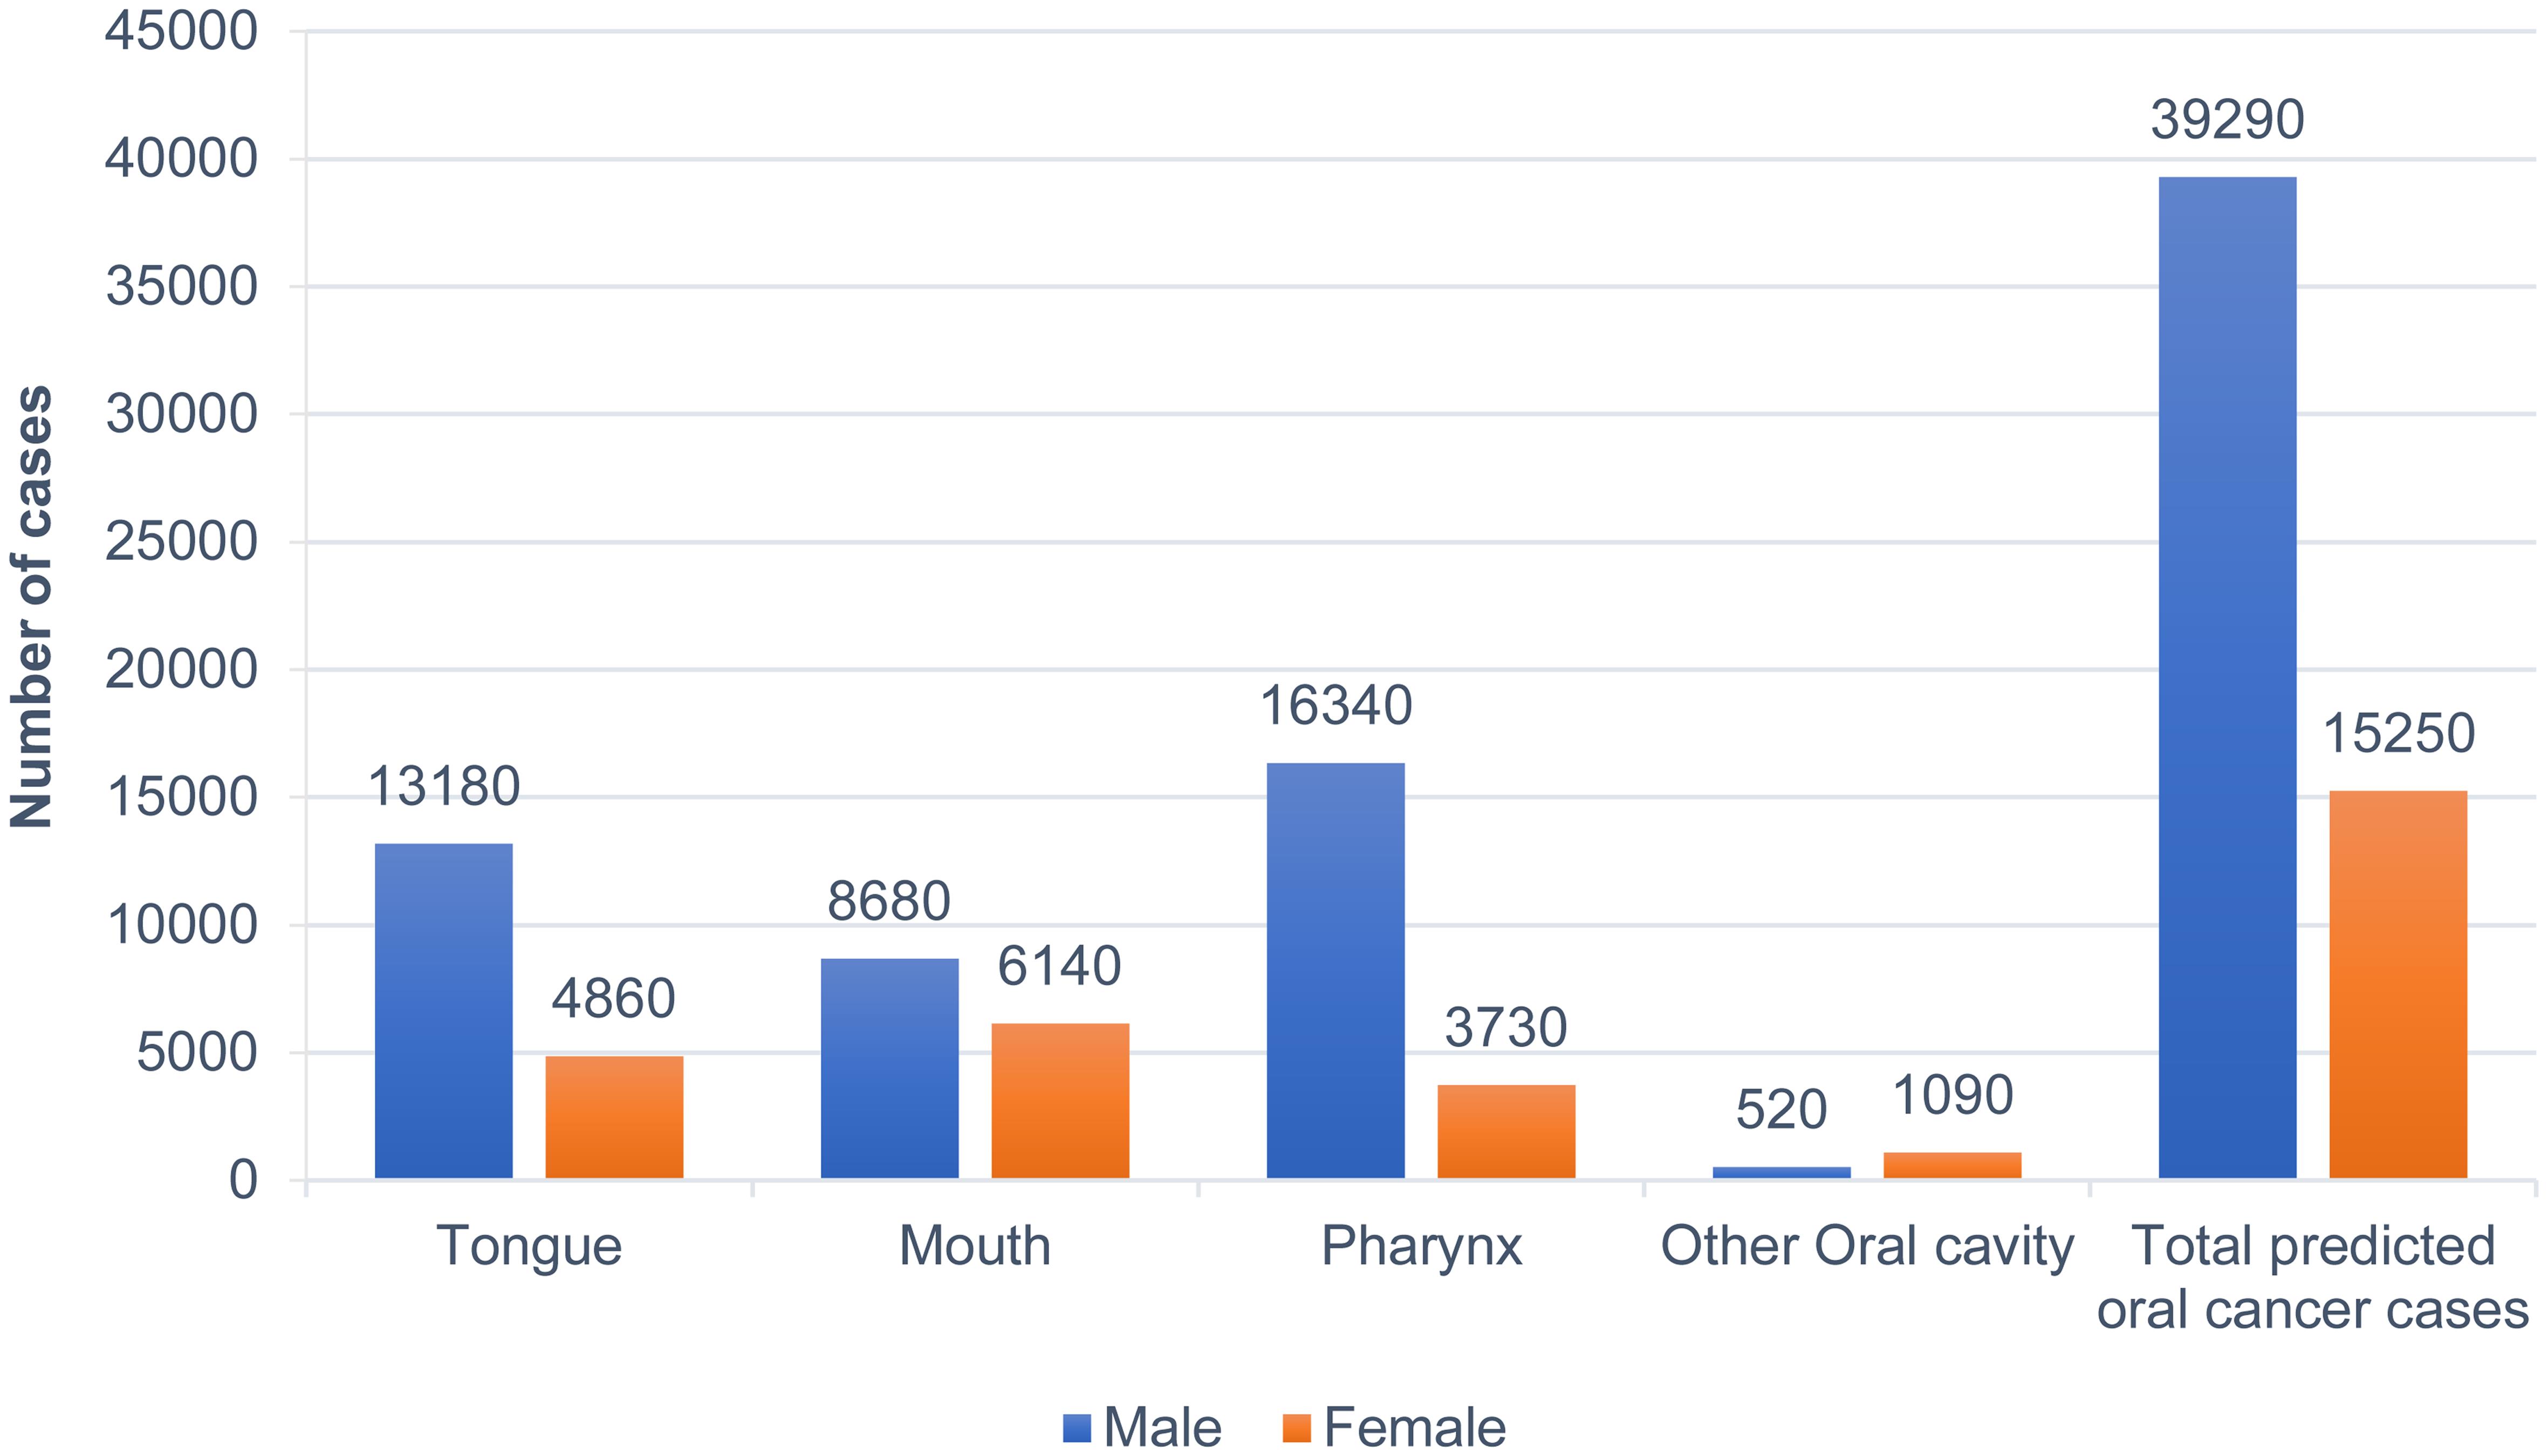 Gender-wise distribution of predicted oral cancer cases in 2023.